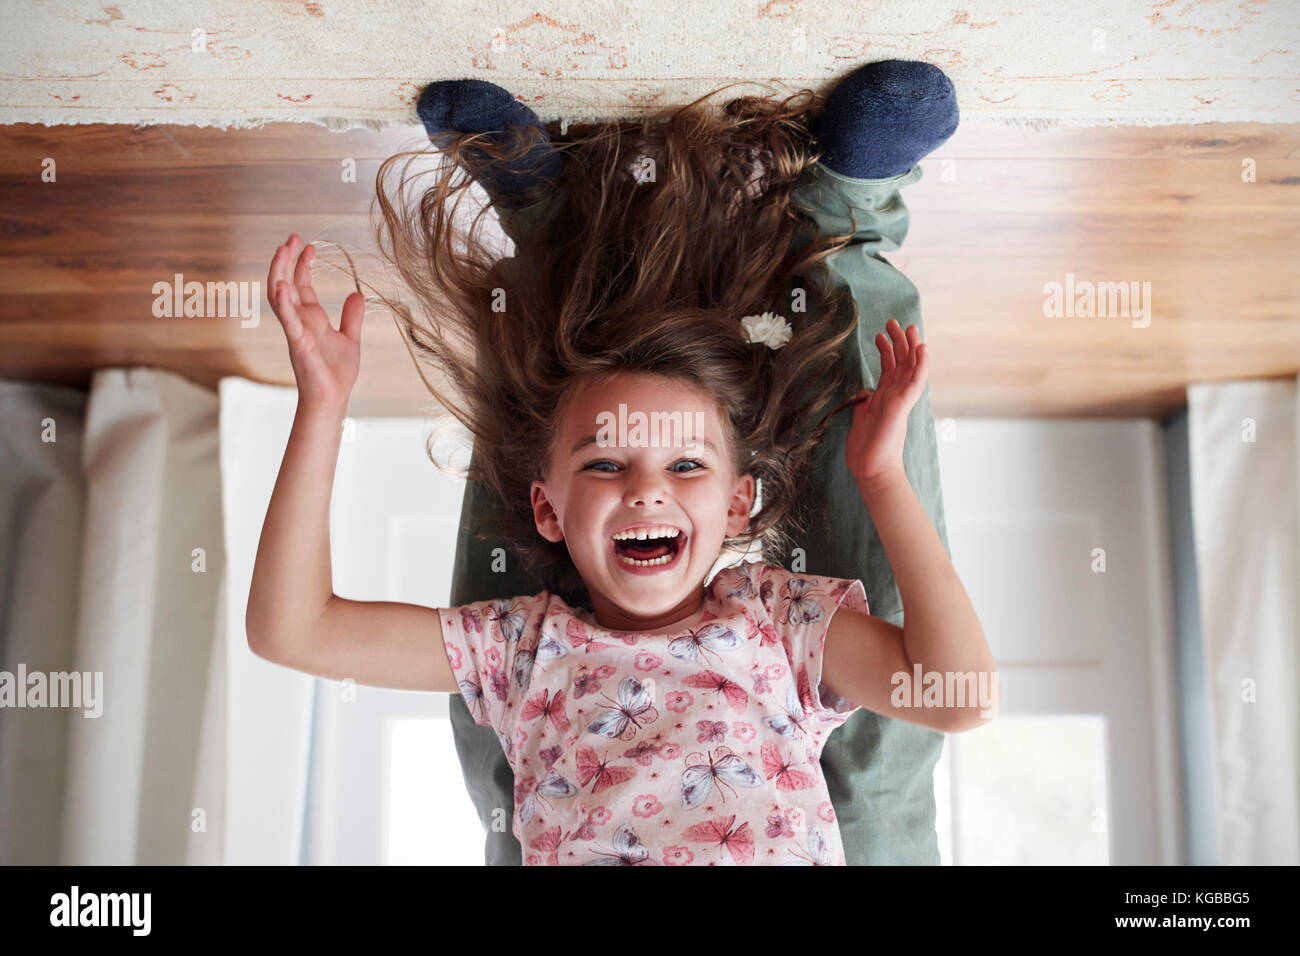 Girl being held upside down by her dad at home, low section Stock Photo